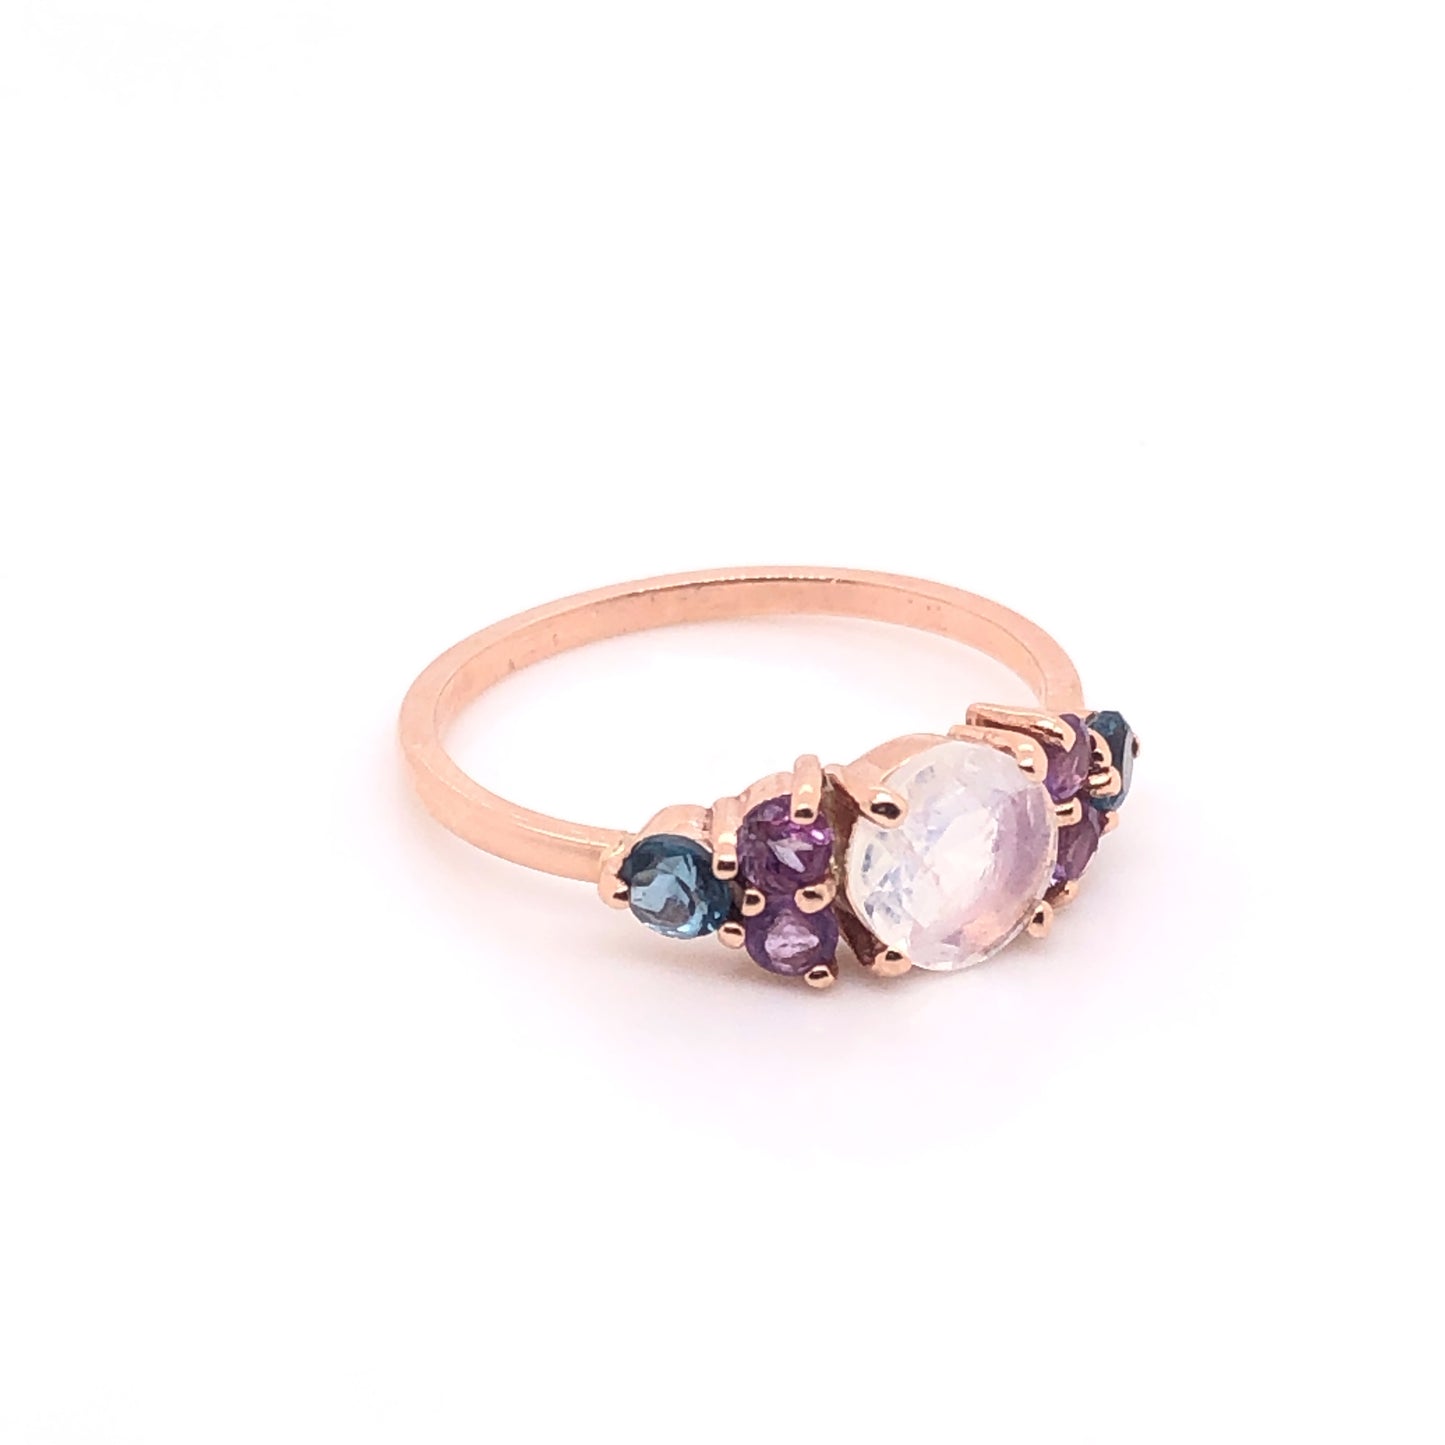 Moonstone Ring with Amethysts and London Blue Topaz